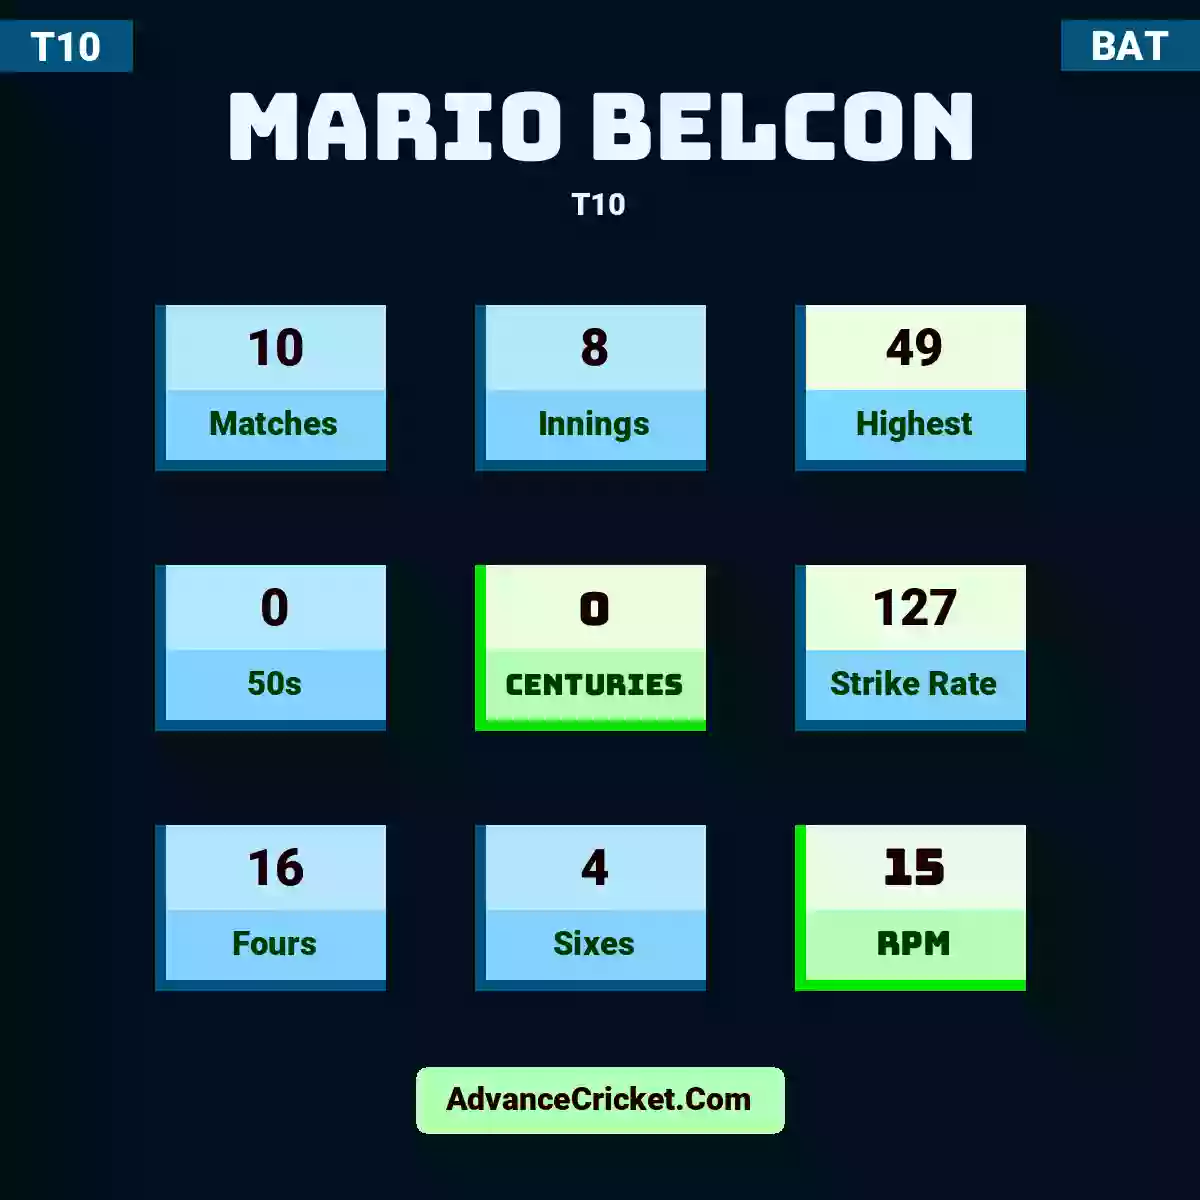 Mario Belcon T10 , Mario Belcon played 10 matches, scored 49 runs as highest, 0 half-centuries, and 0 centuries, with a strike rate of 127. m.belcon hit 16 fours and 4 sixes, with an RPM of 15.